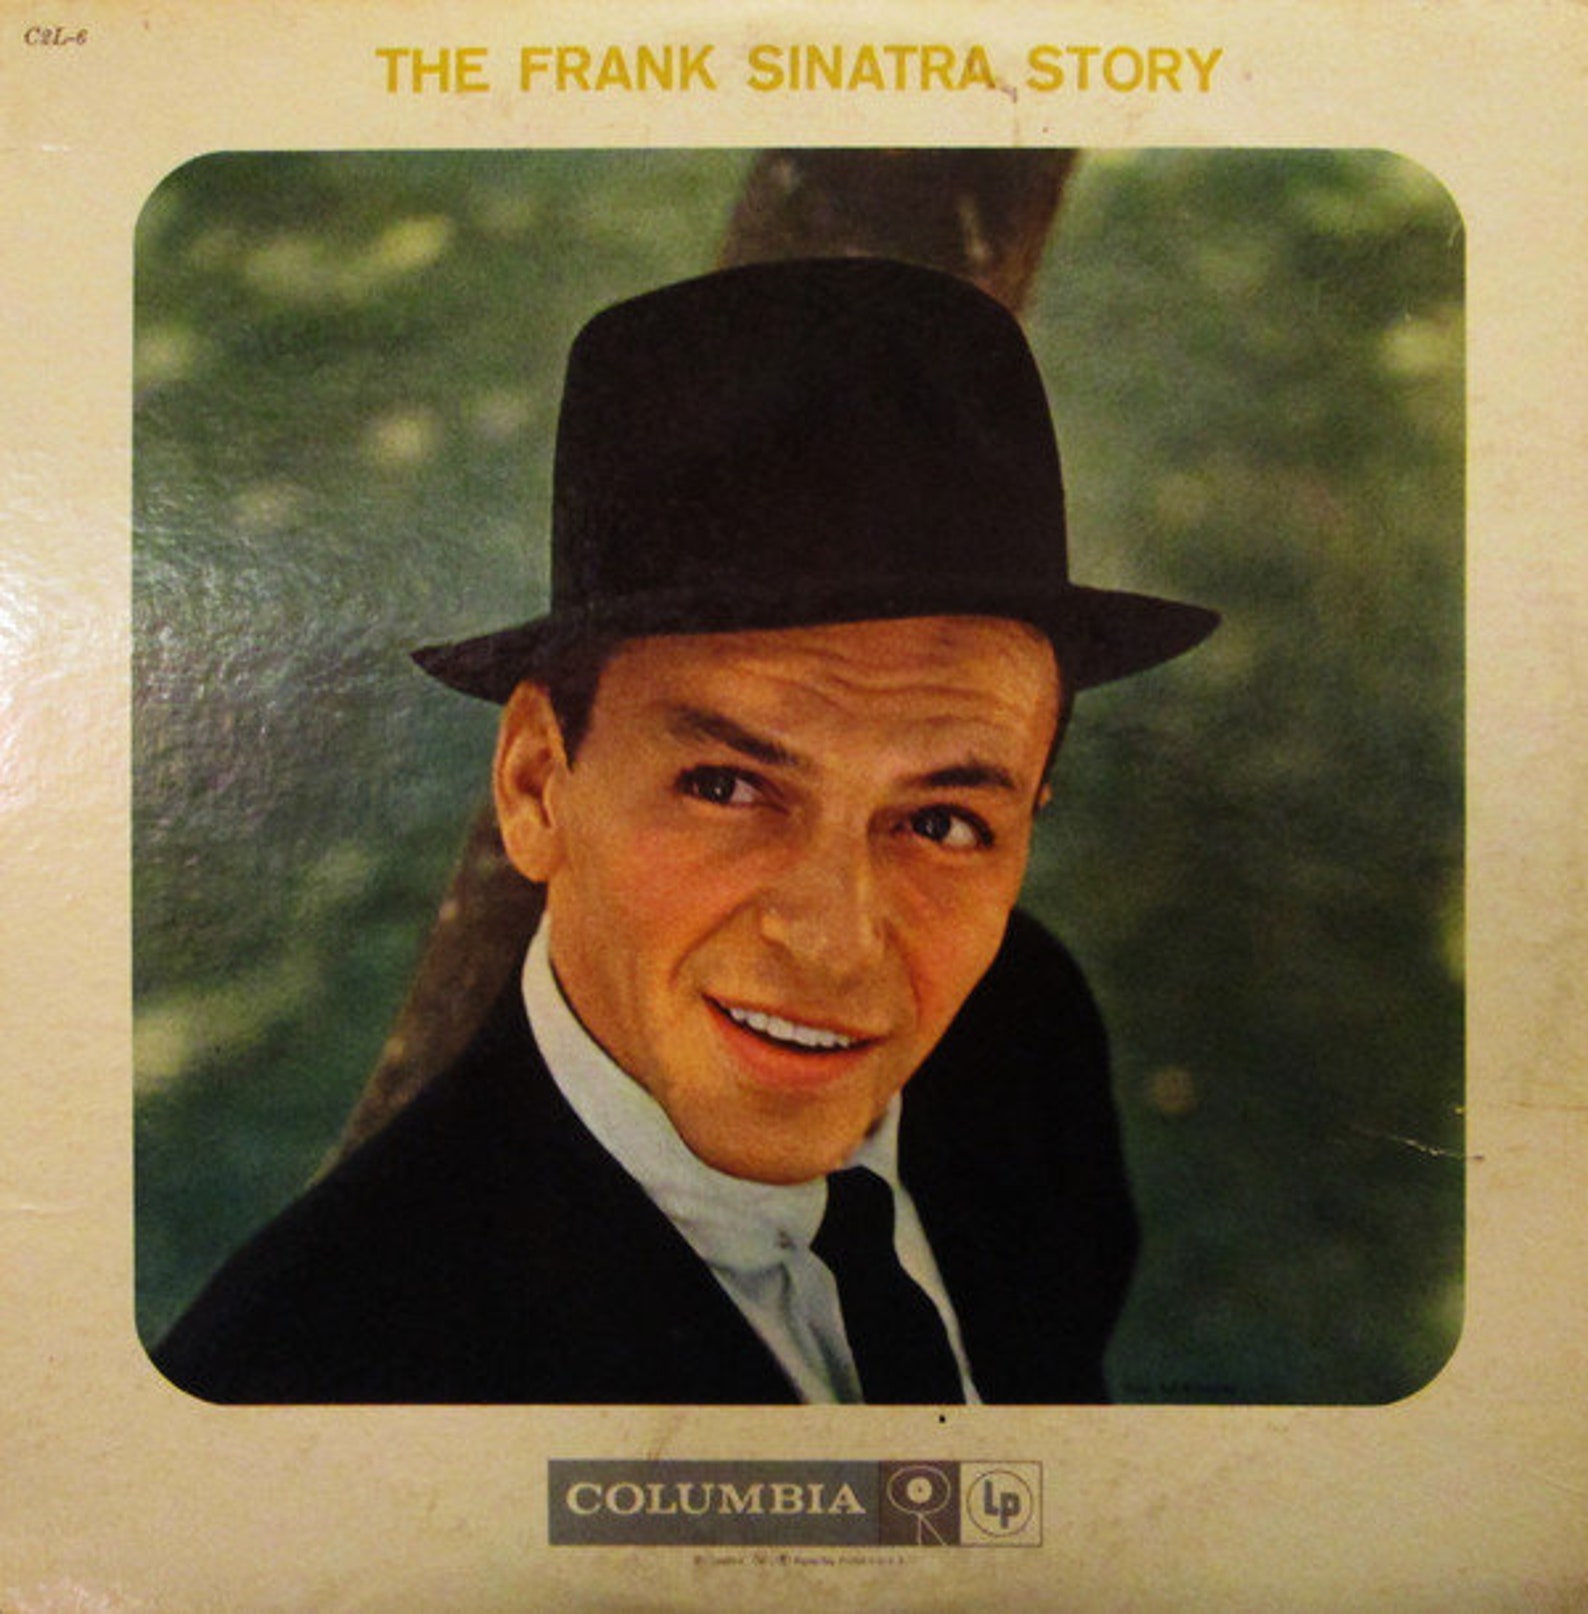 Фрэнк минск. Frank Sinatra in the Wee small hours Vinyl.